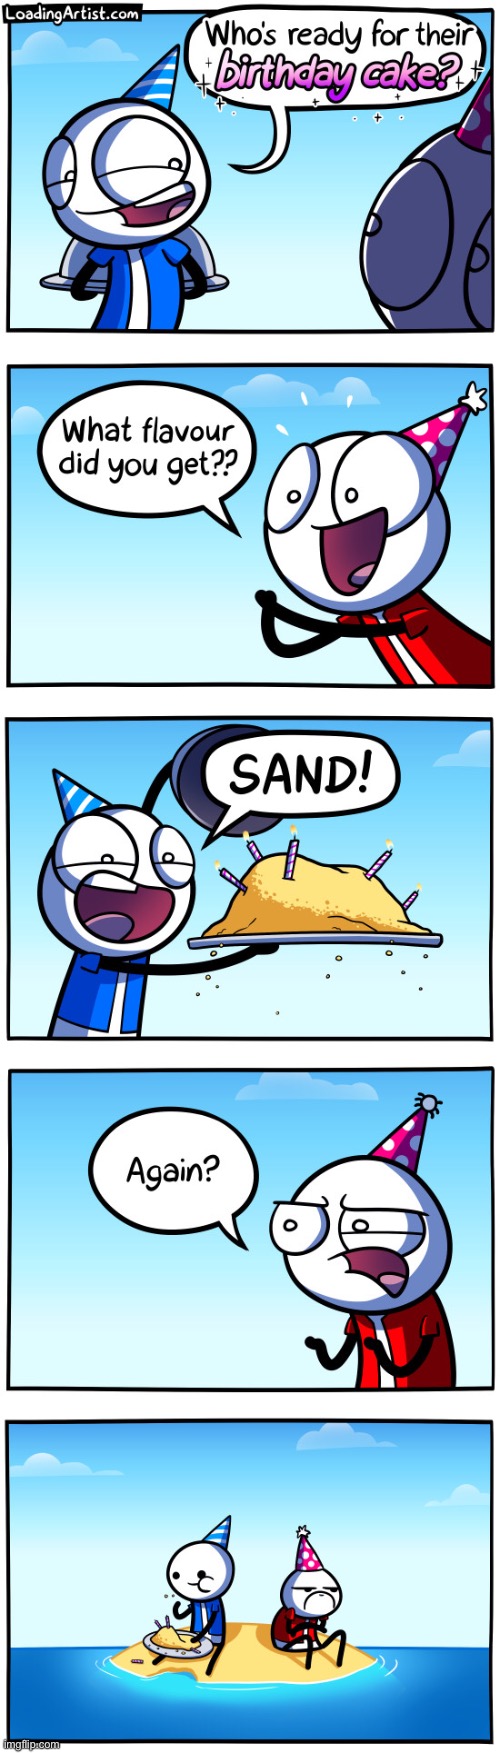 Again? | image tagged in memes,funny,comics,loading artist,sand,cake | made w/ Imgflip meme maker